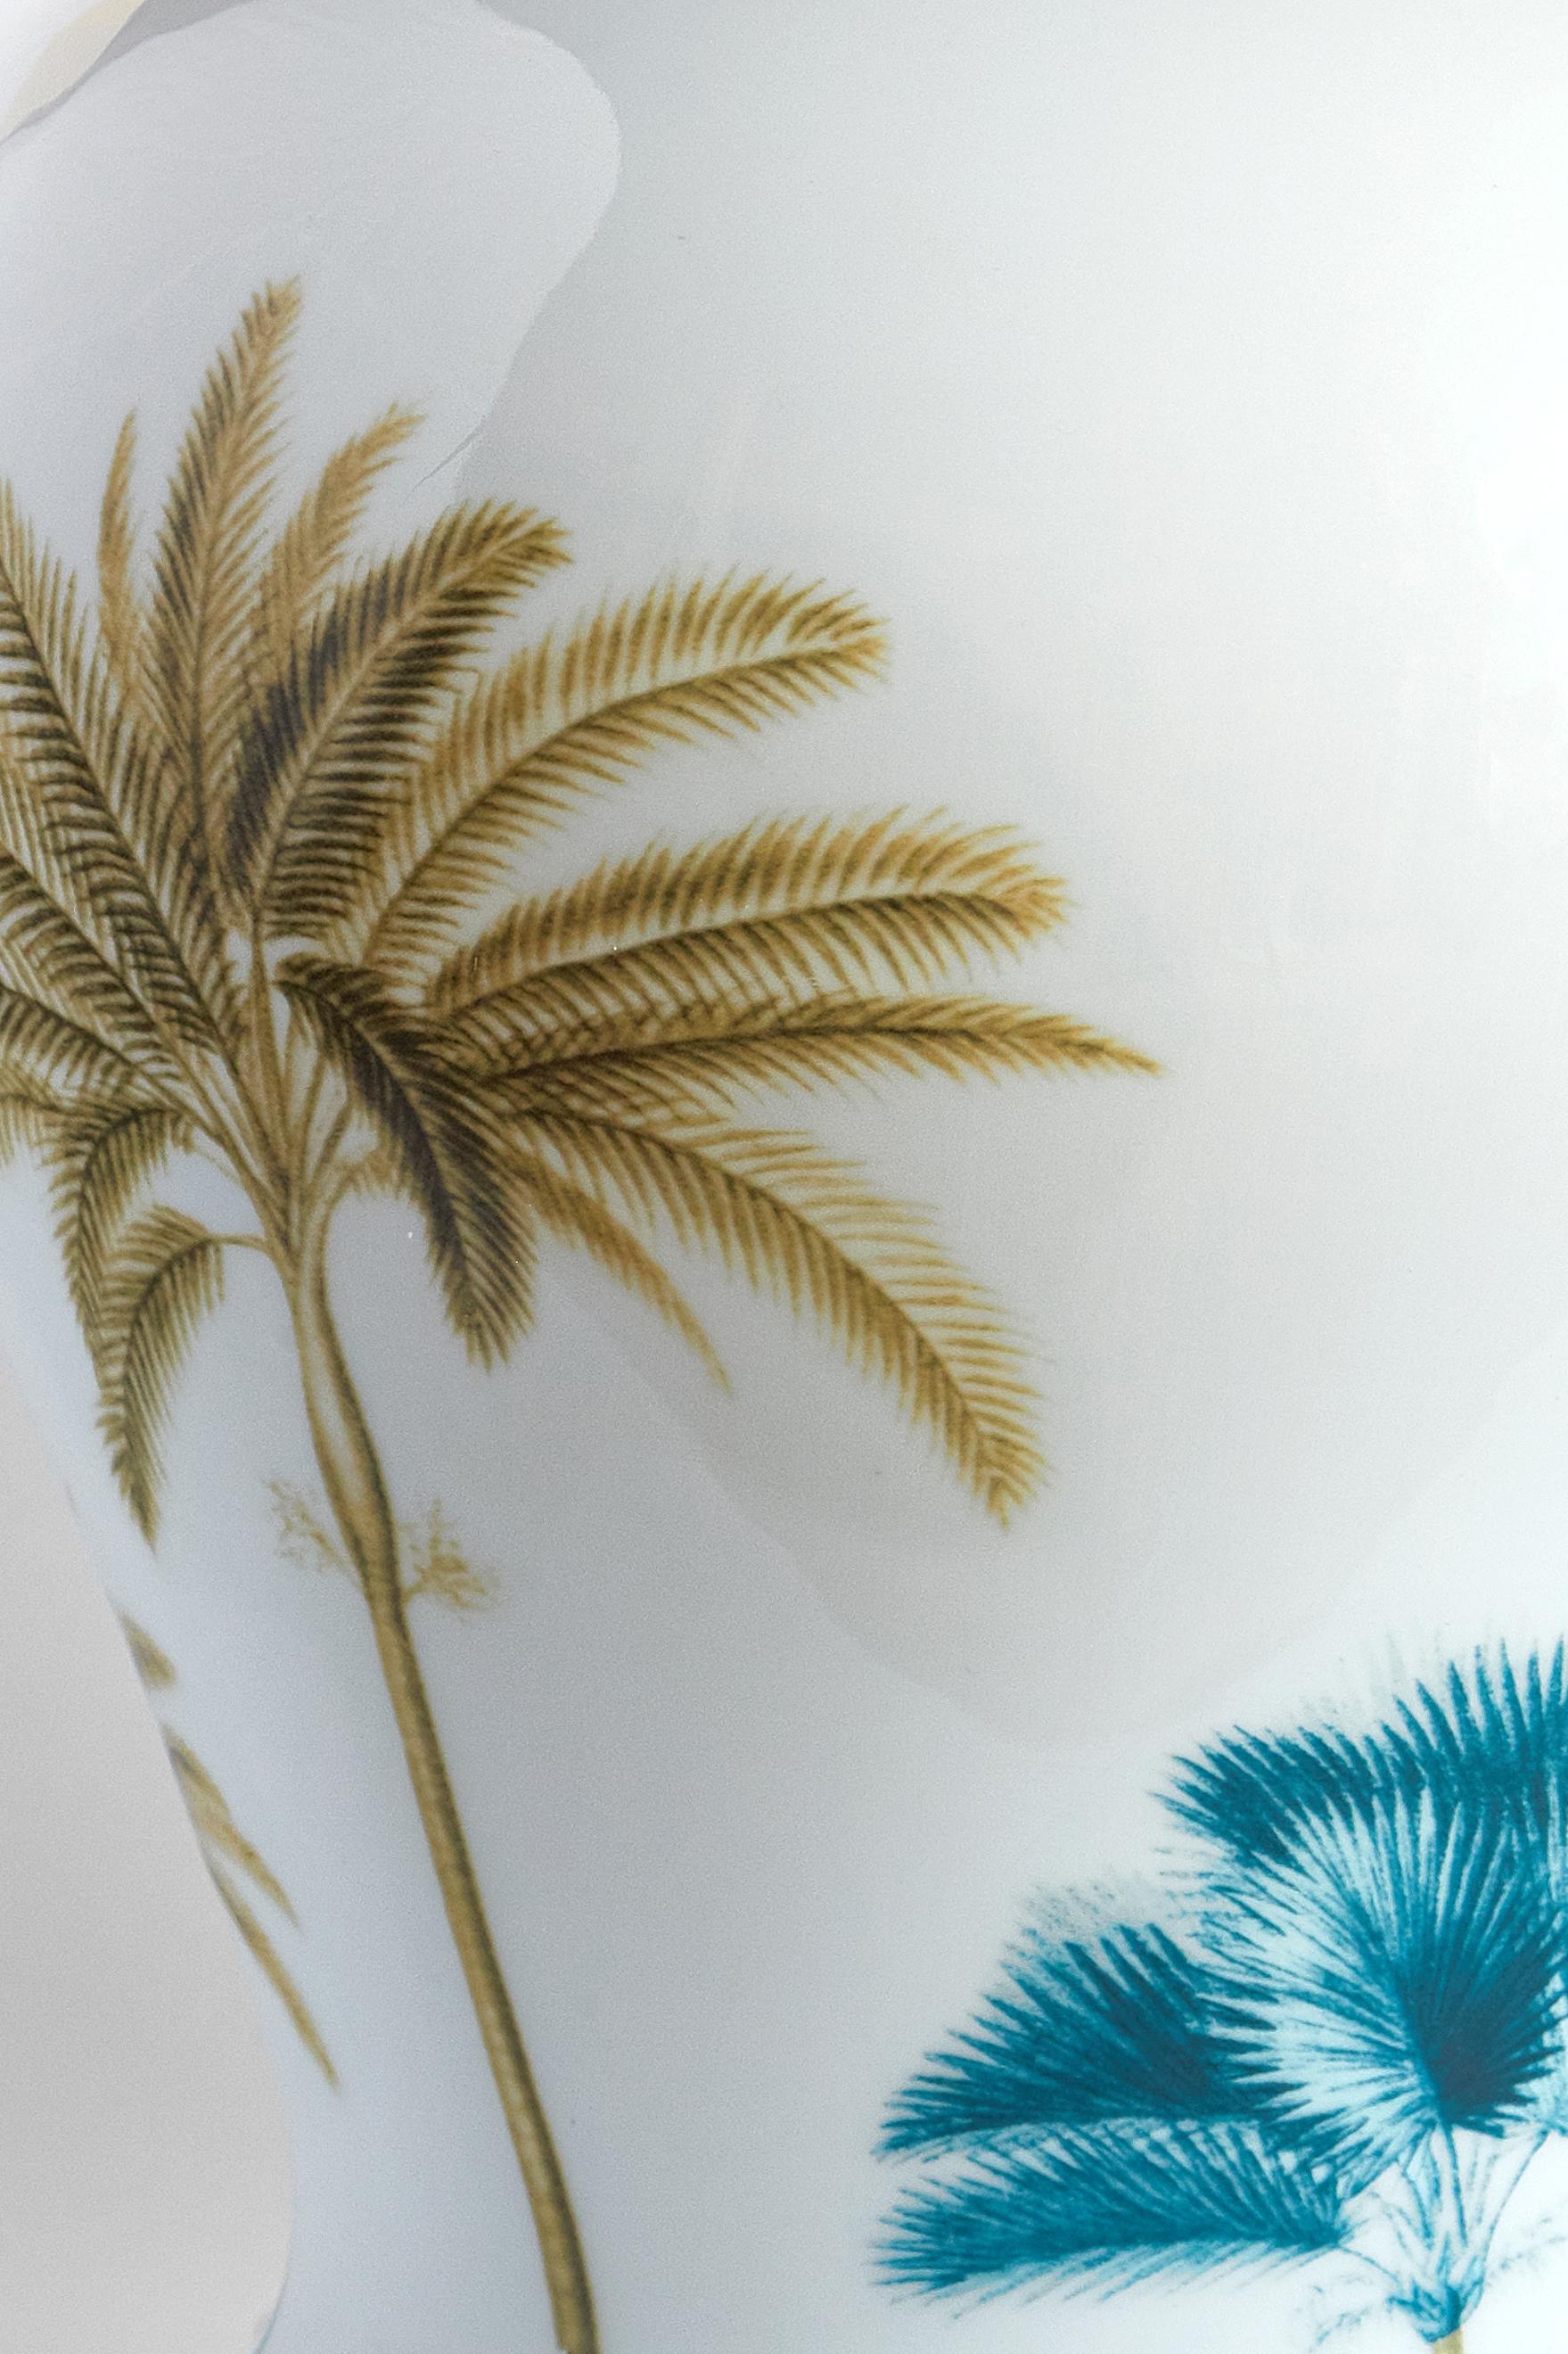 The Classic design of this porcelain vase comes back to life with retro decorations with a contemporary flavor. Teal and ocher palms intersperse around the perimeter of the precious vase.